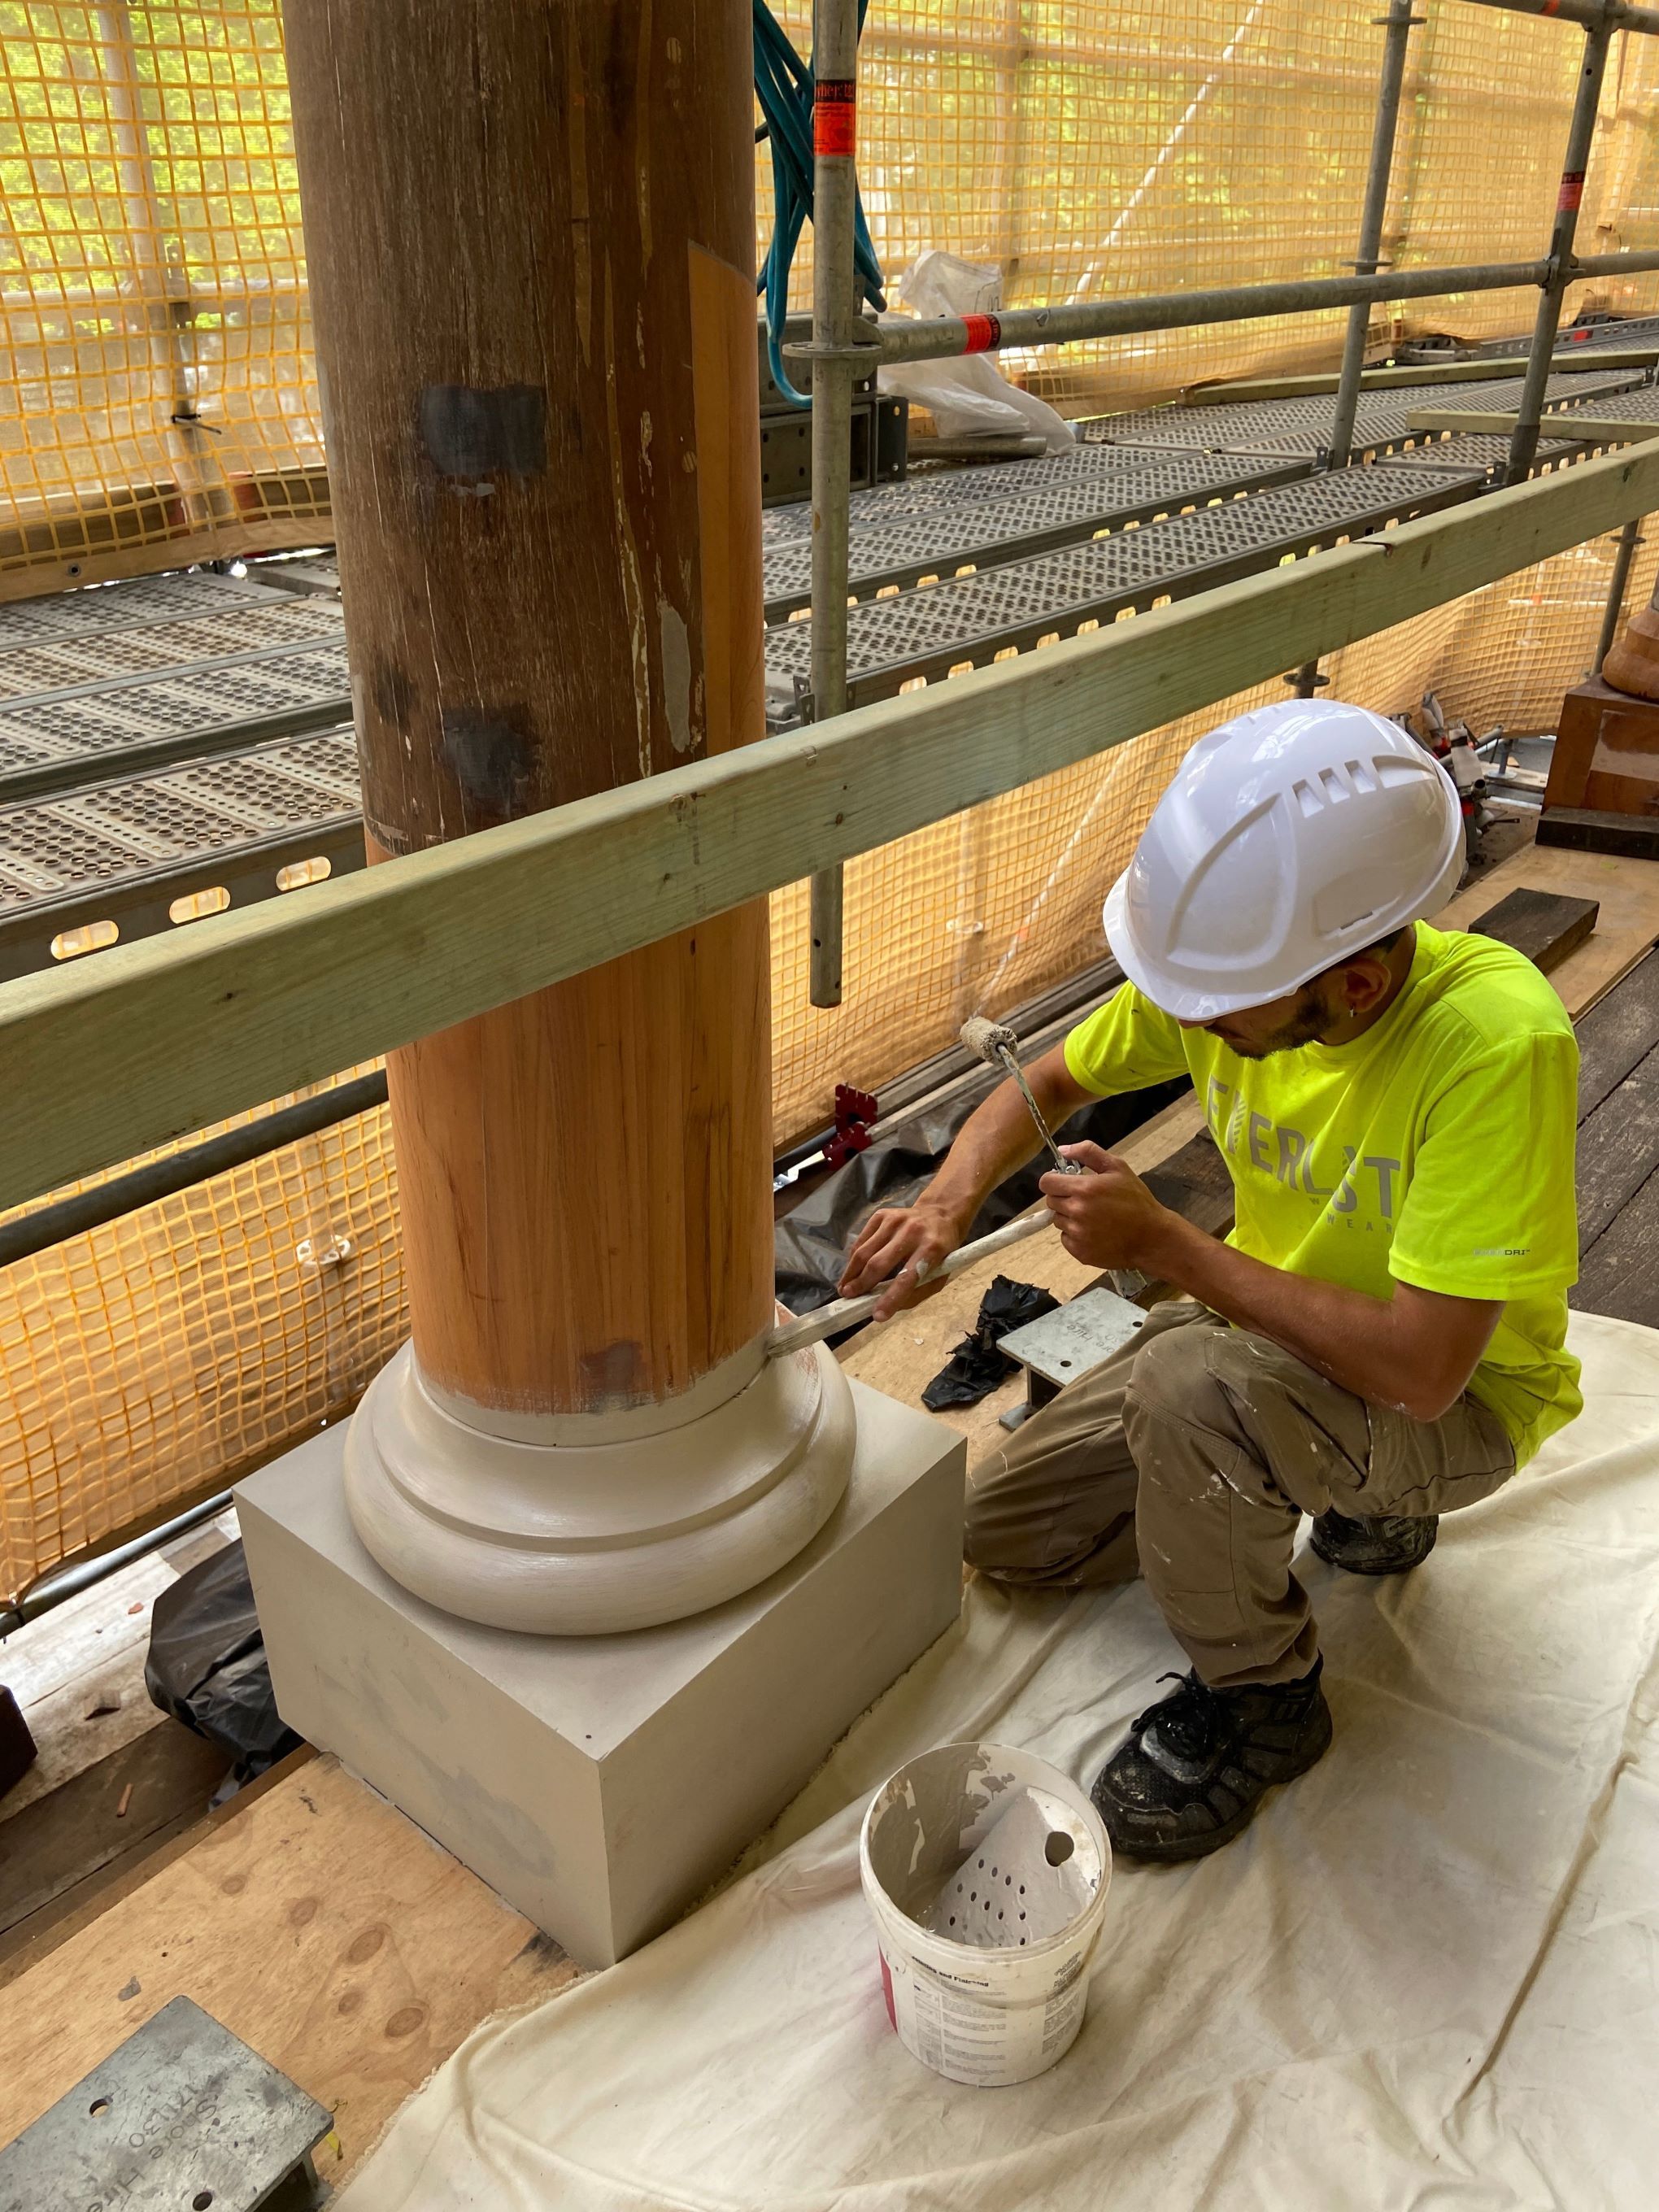 Construction worker painting the base of a wooden column